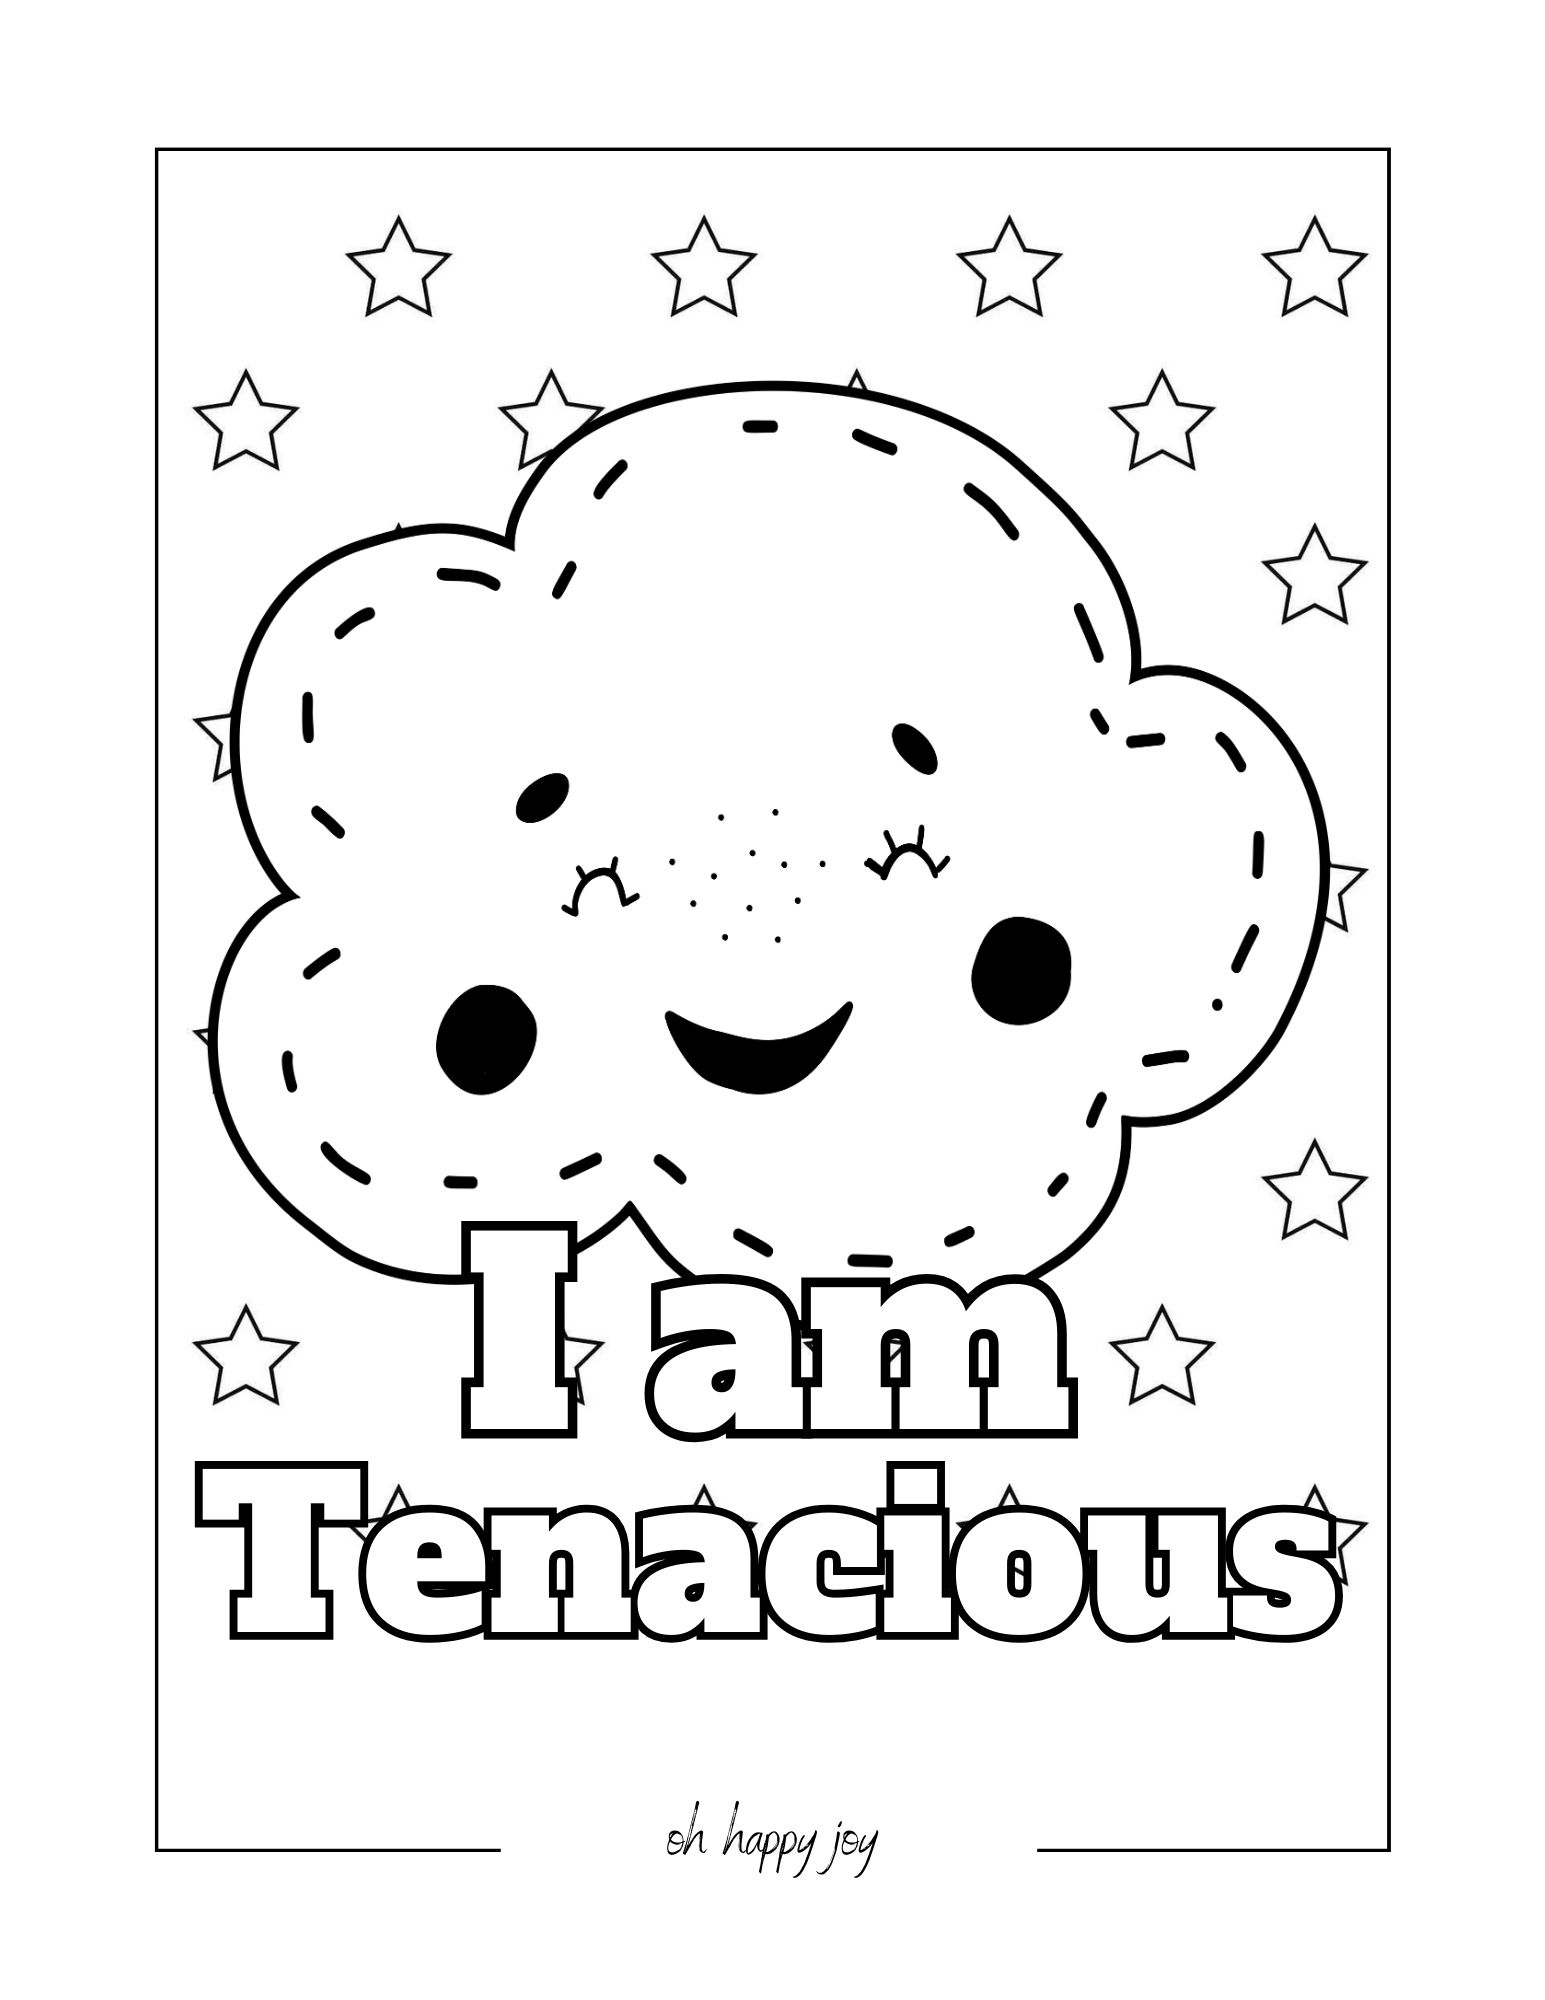 I am tenacious affirmation coloring page